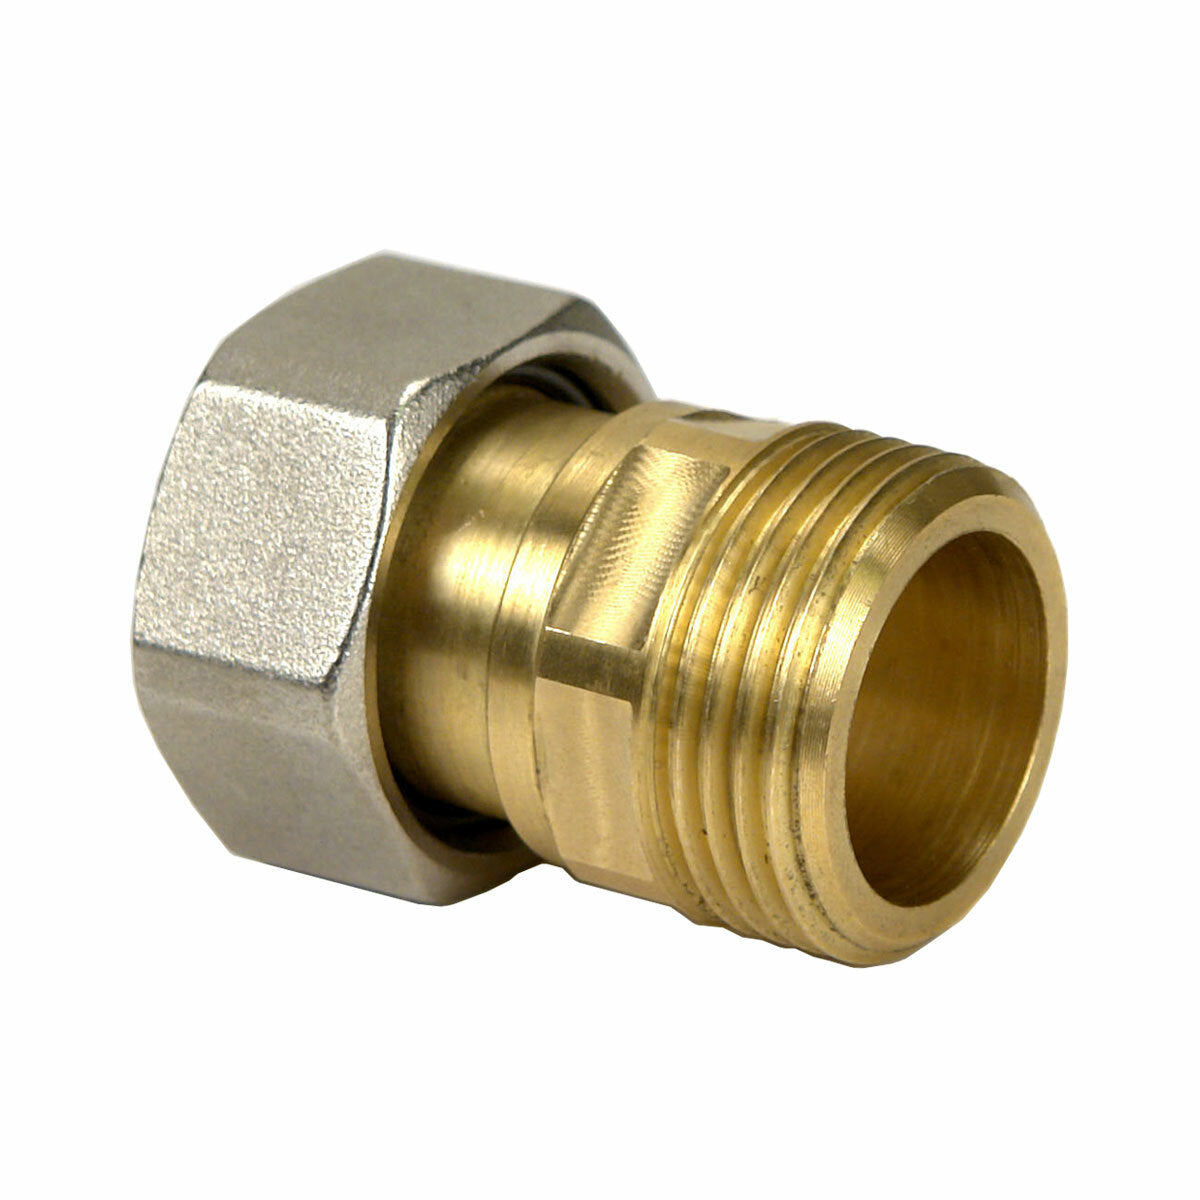 Enolgas Reverso swivel fitting M 1" x 3/4" for ball valve ideal for boiler manifold and fan coil units